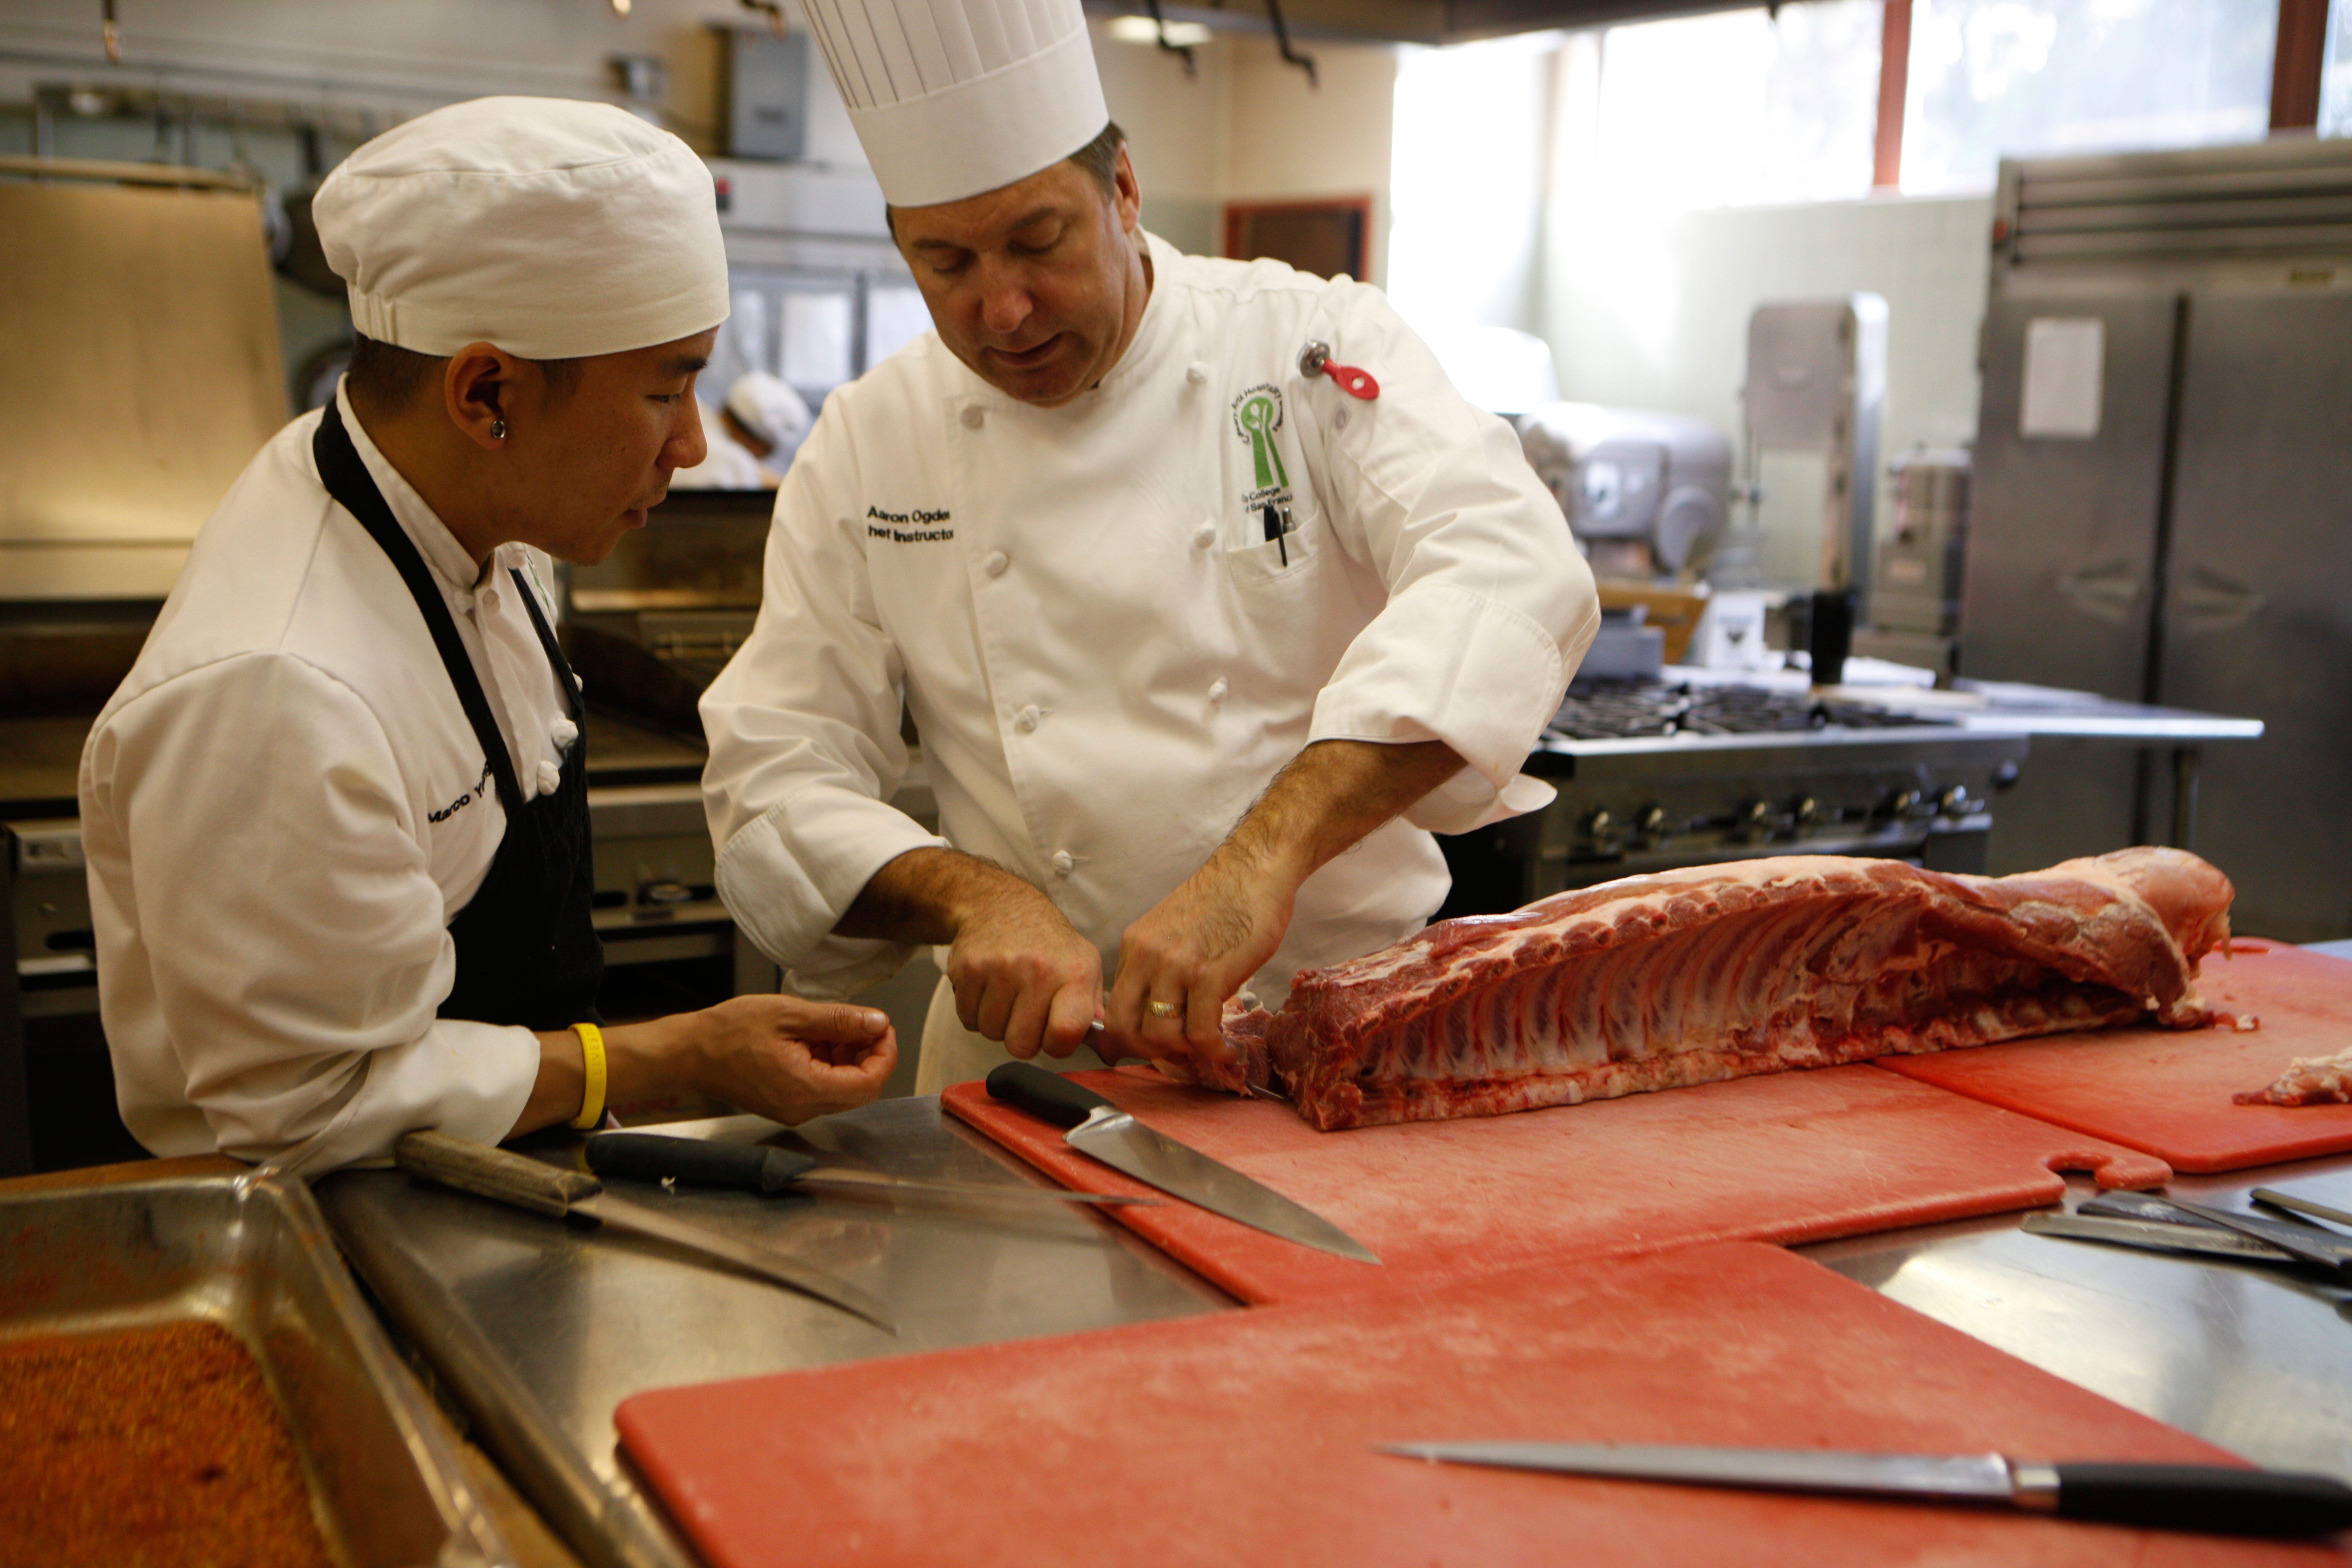 Chef Aaron Ogden, right, shows second-semester culinary student Marco Young how to cut beef sections. (Photo by Franchon Smith/ The Guardsman)